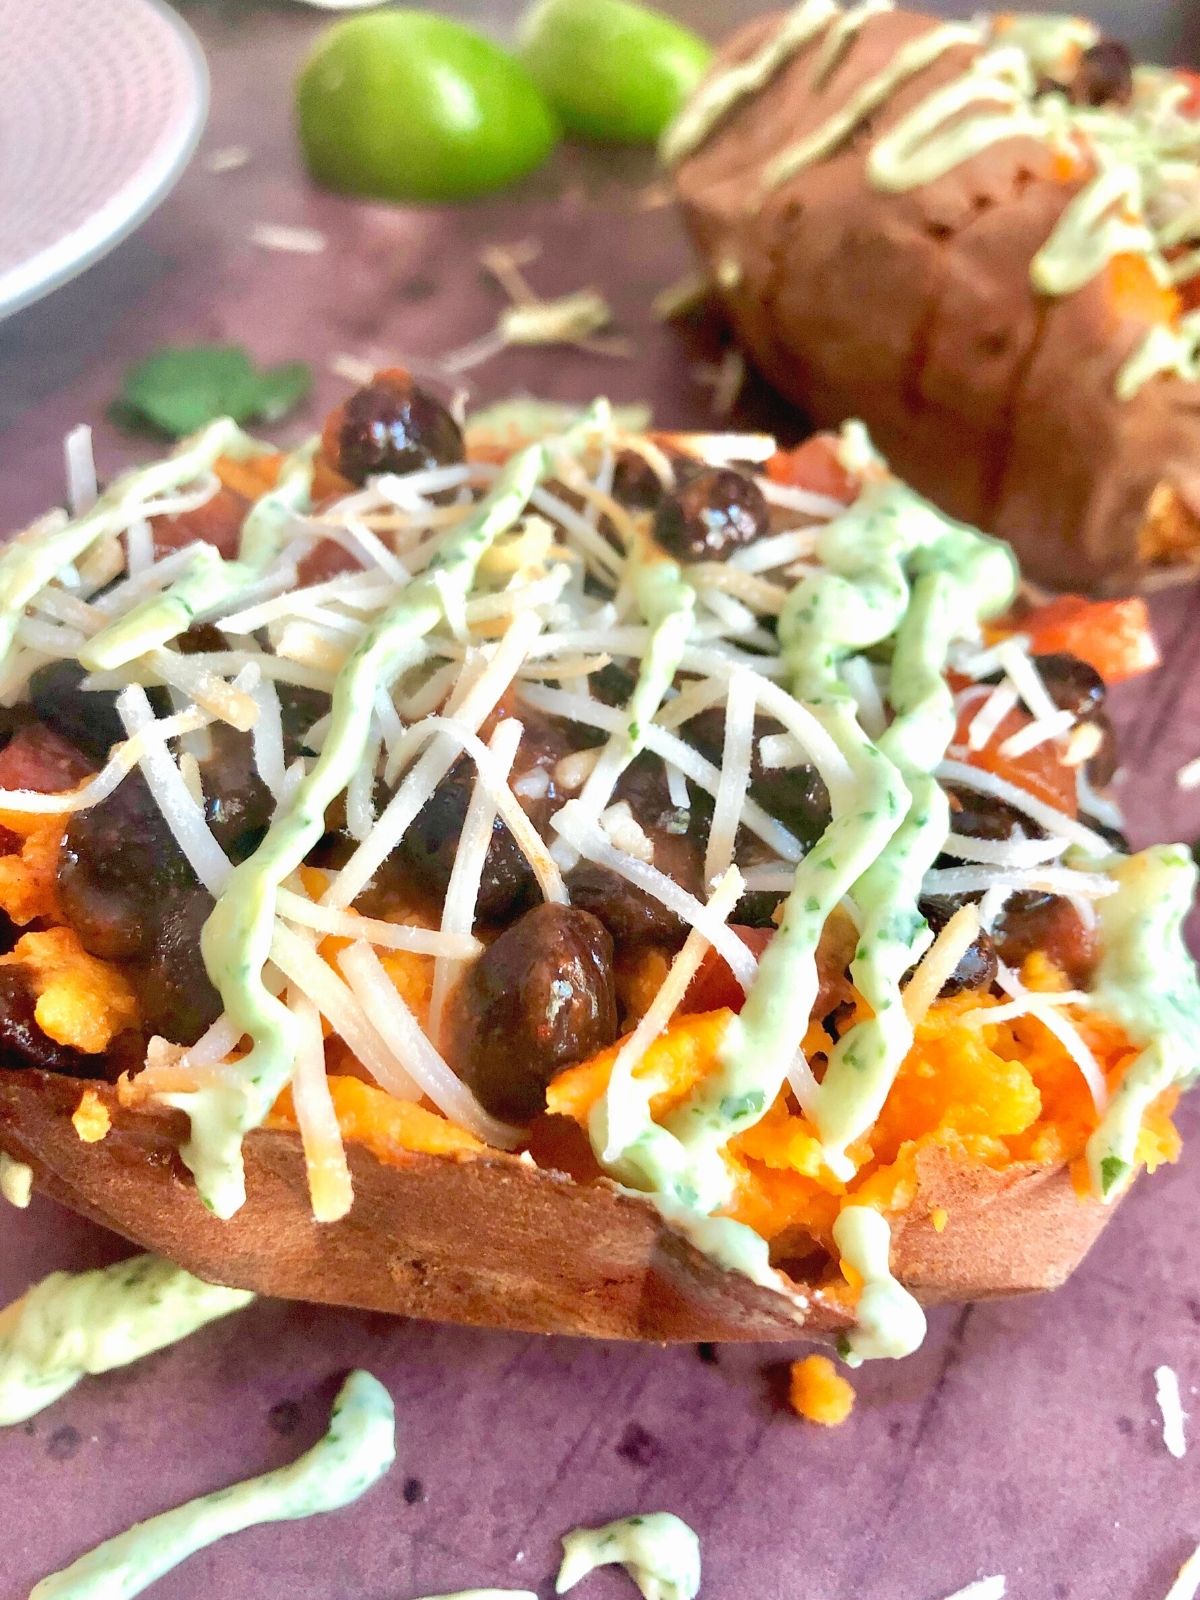 sweet potato stuffed with taco toppers: black beans and salsa, shredded cheese and drizzled avocado sauce.